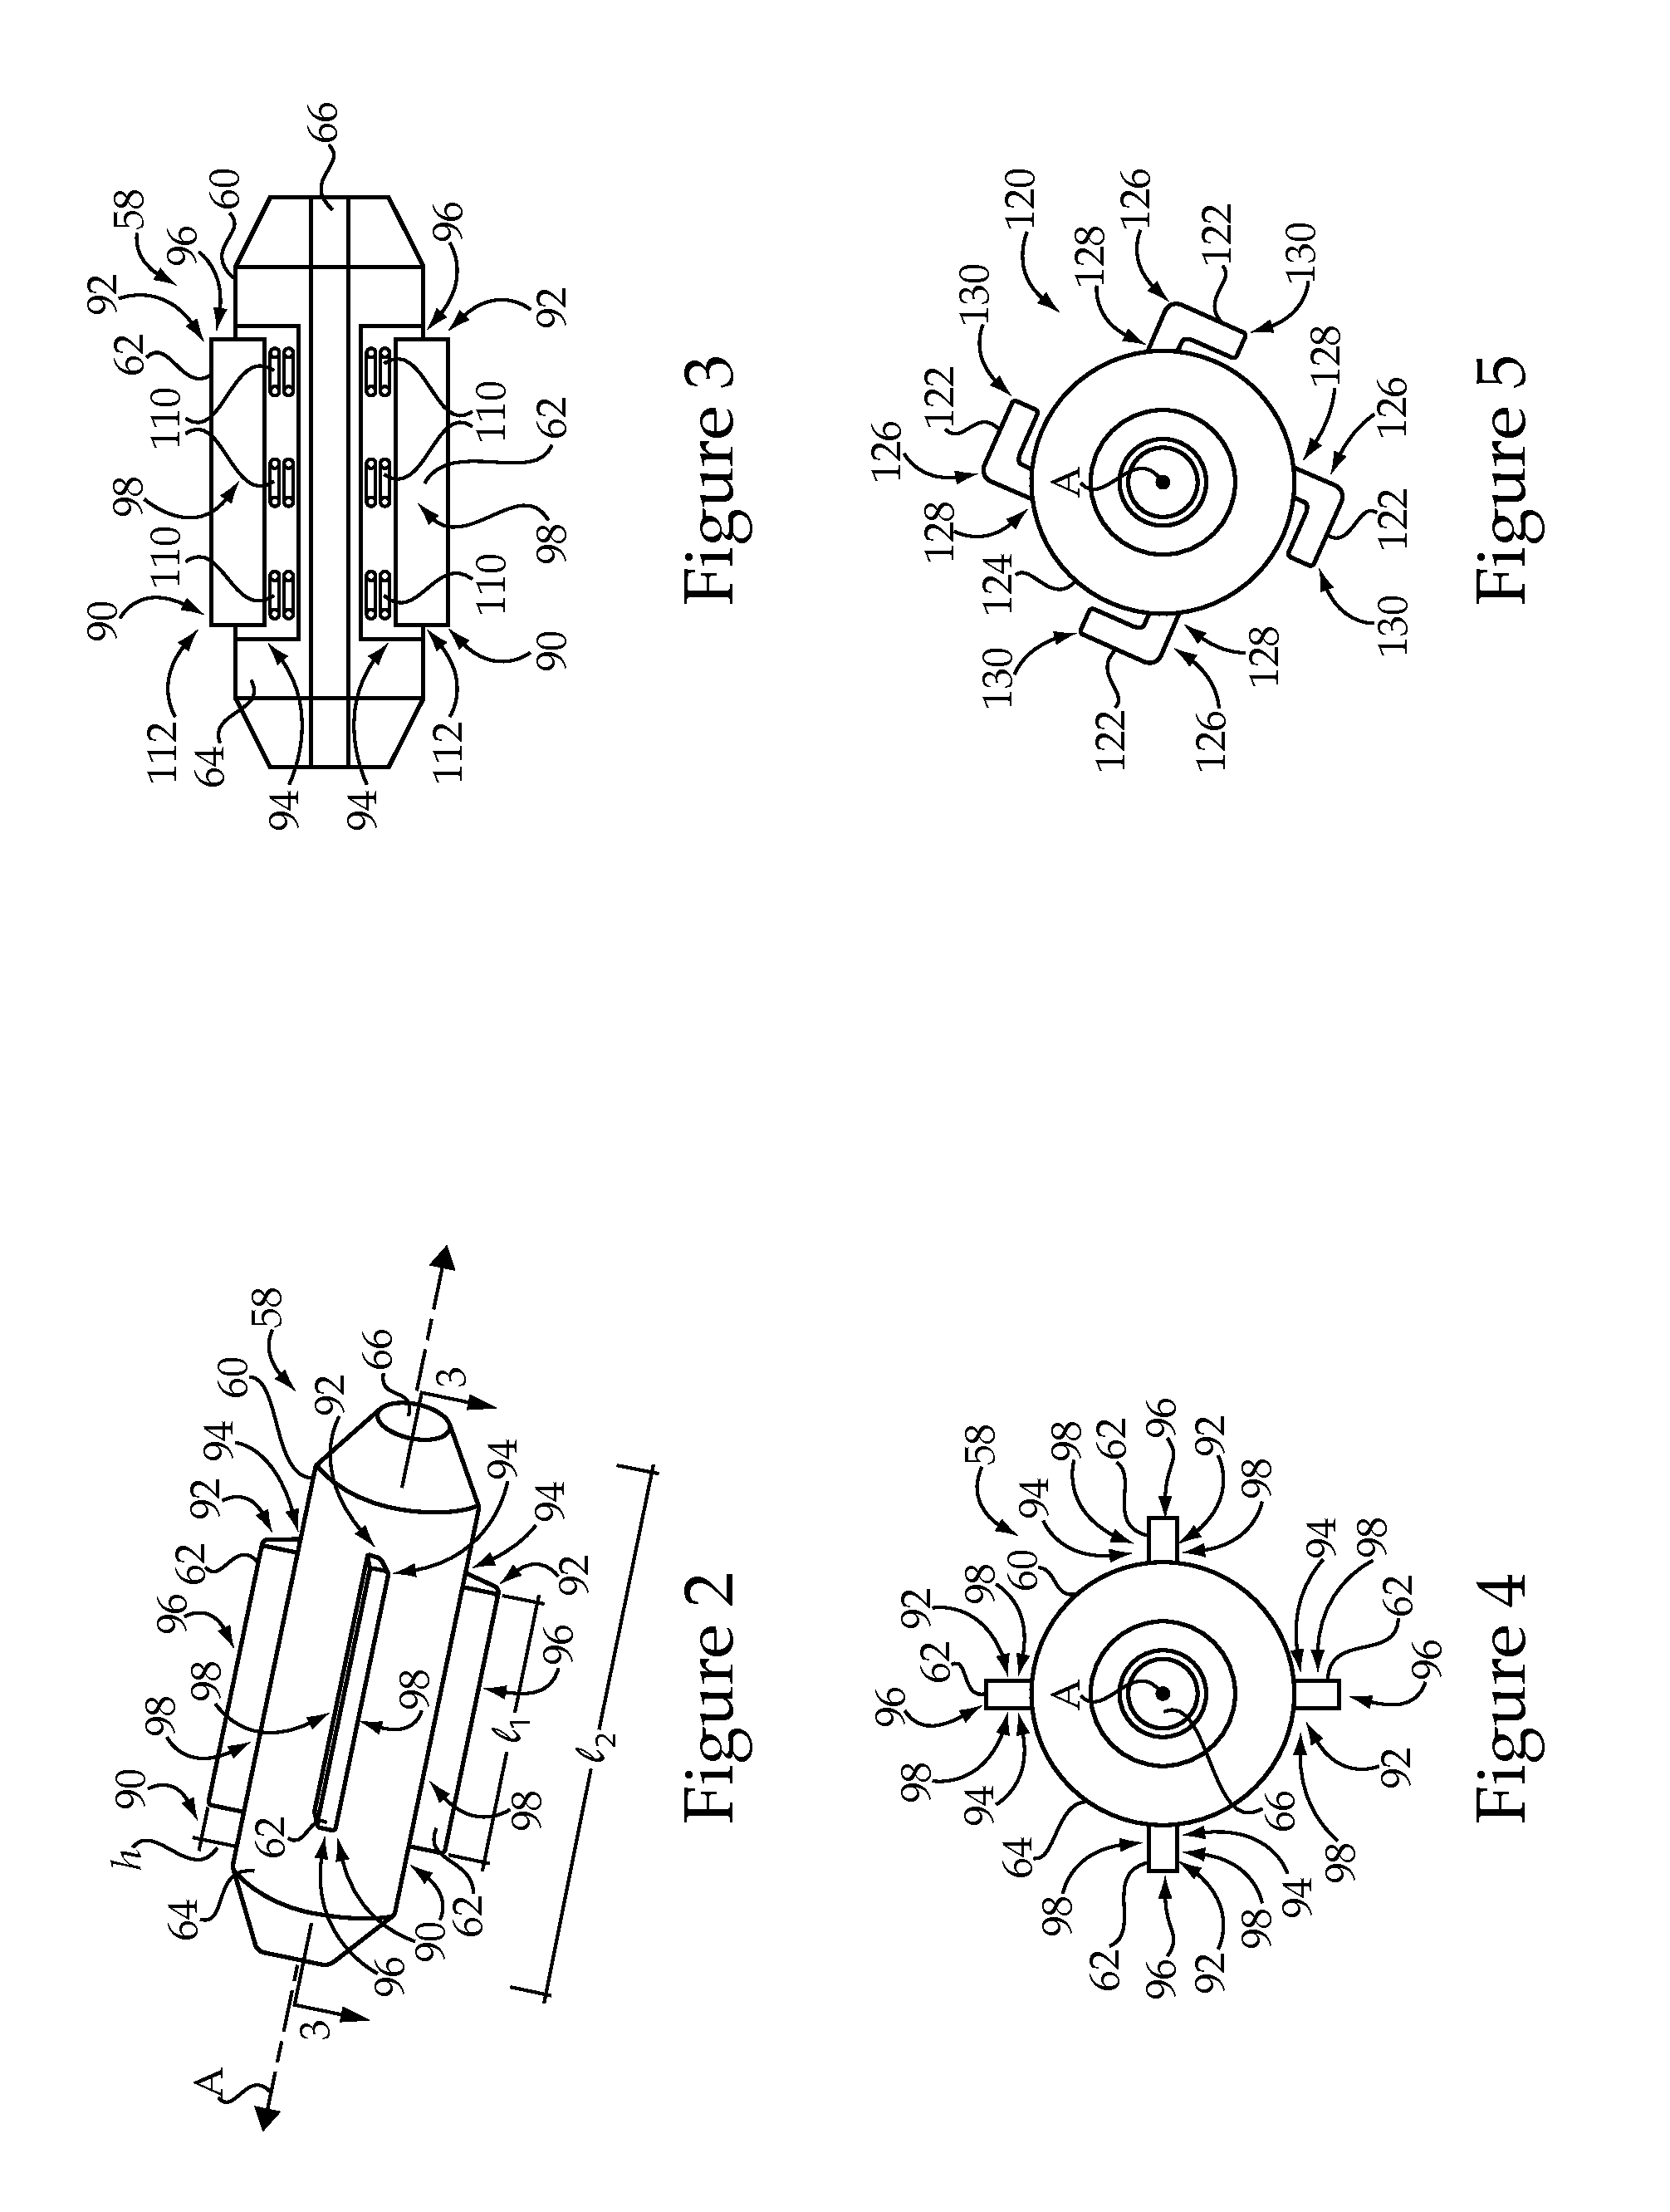 Clot removal system and method